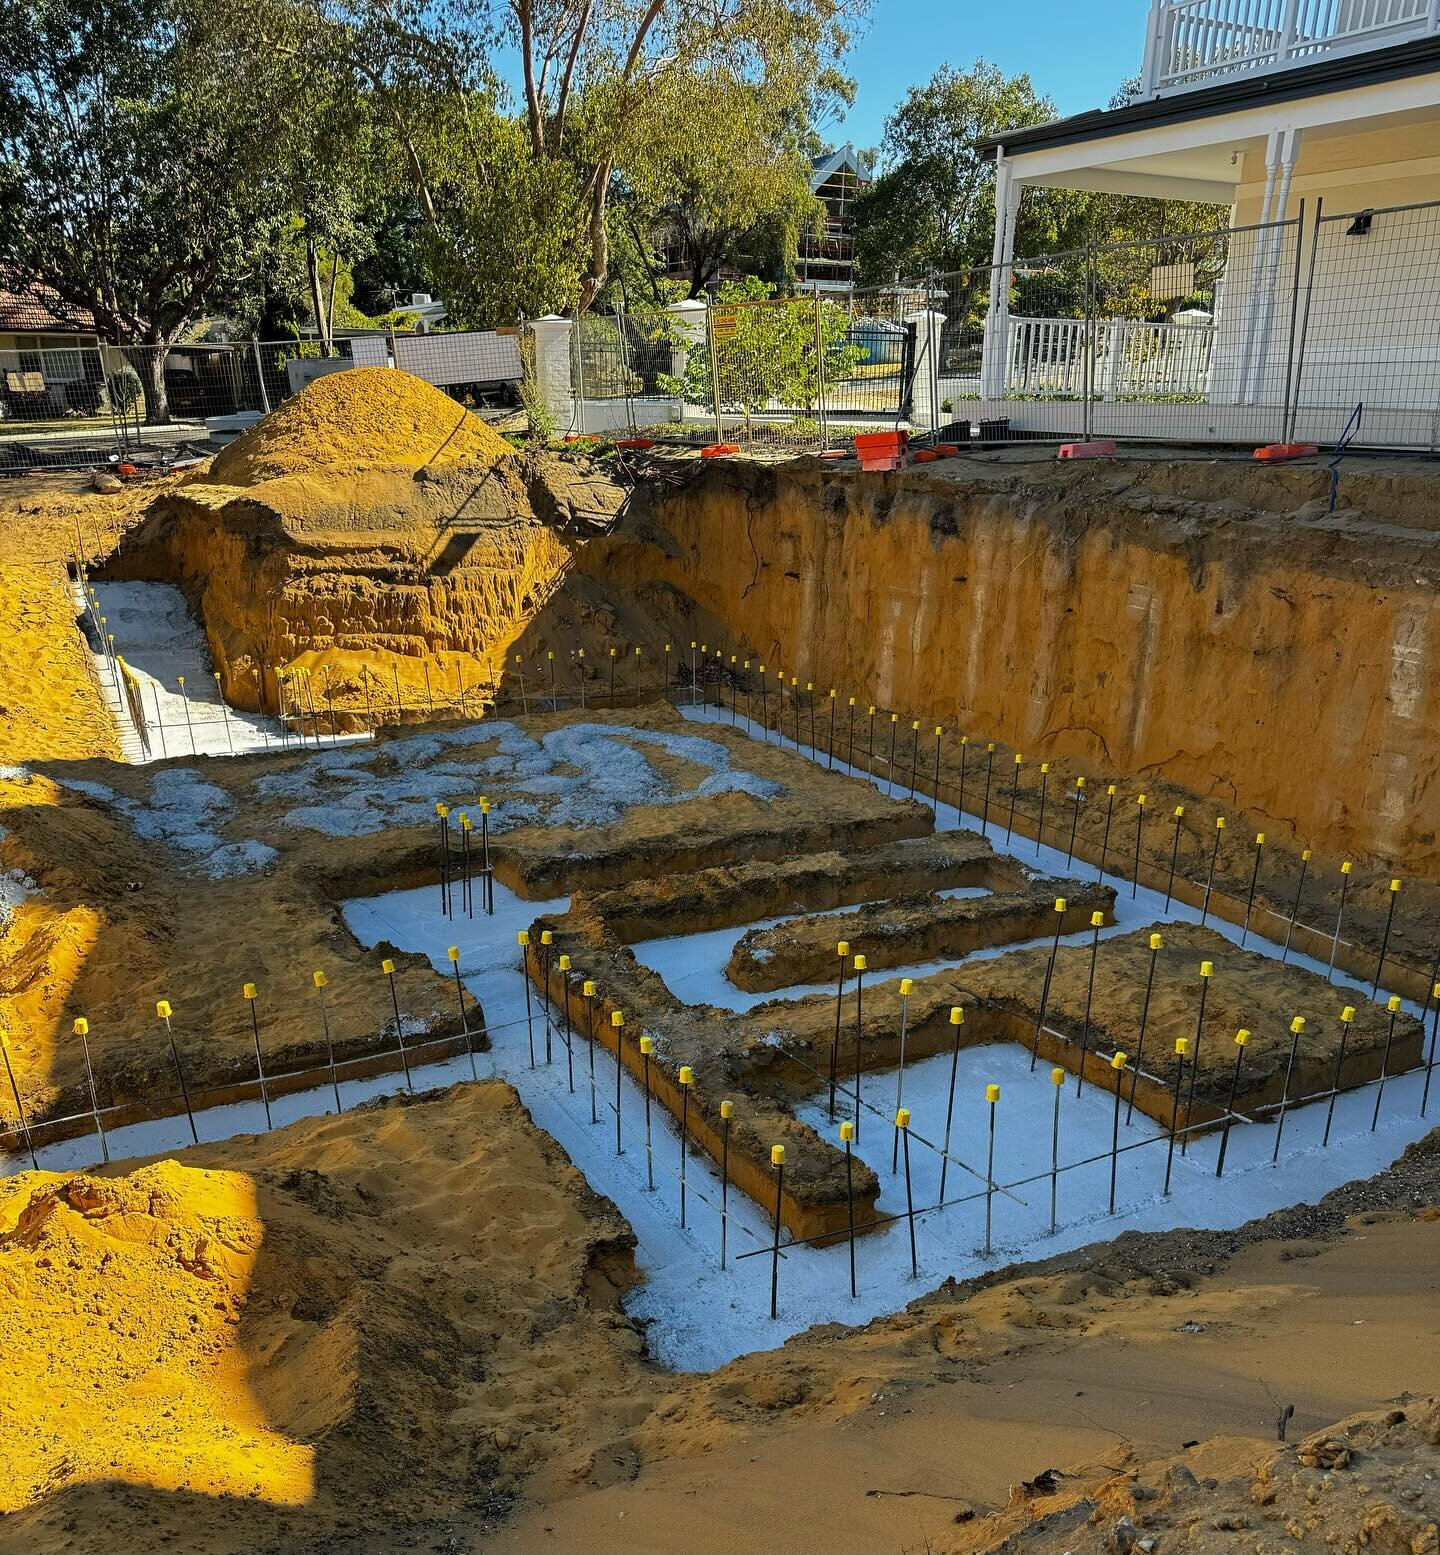 Footings down, ready to lay retaining walls for undercroft garage...
Architect | @superseed_architecture